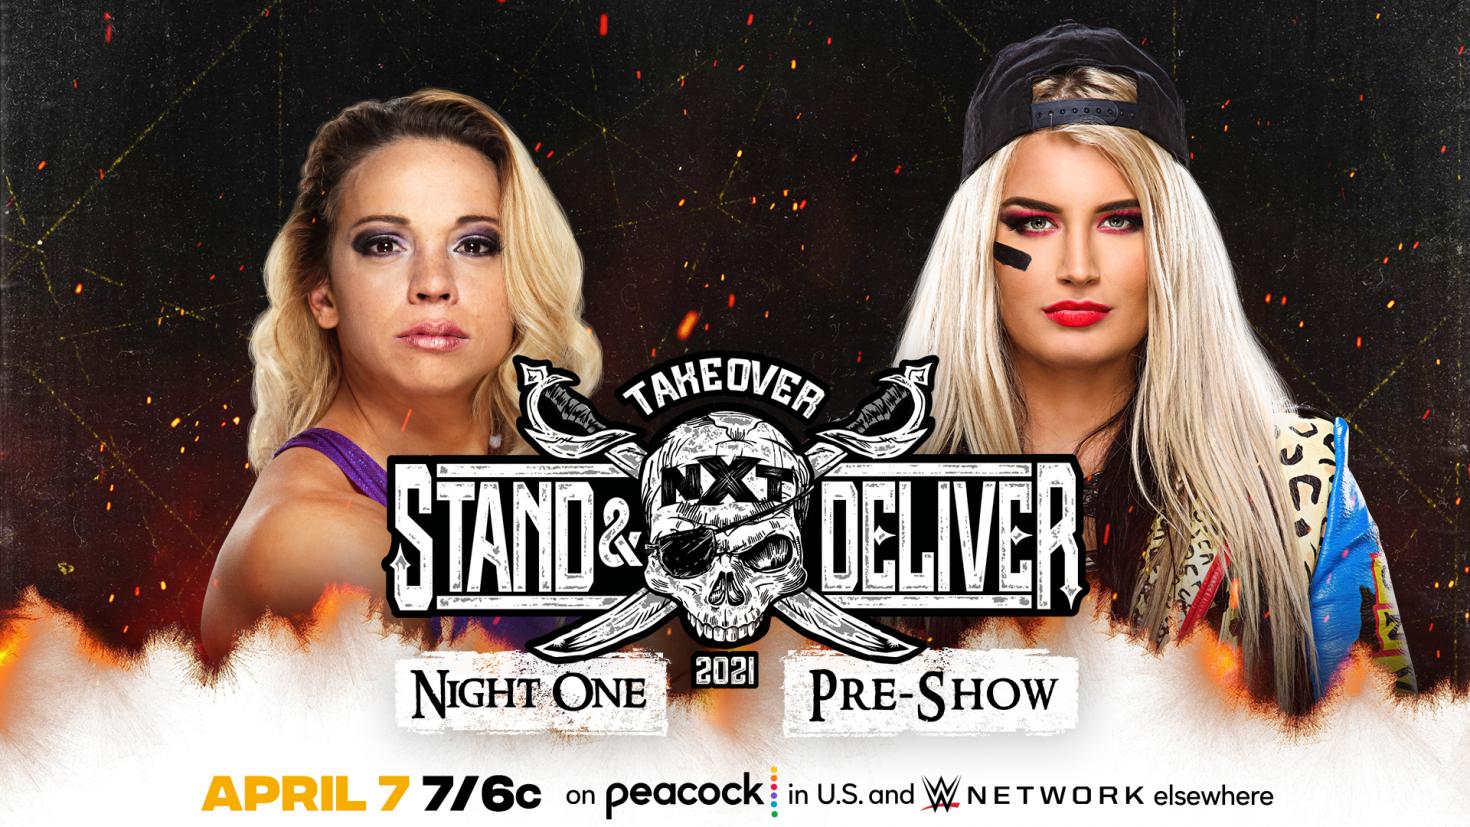 WWE announces match before show for NXT “TakeOver: Stand And Deliver” Night One